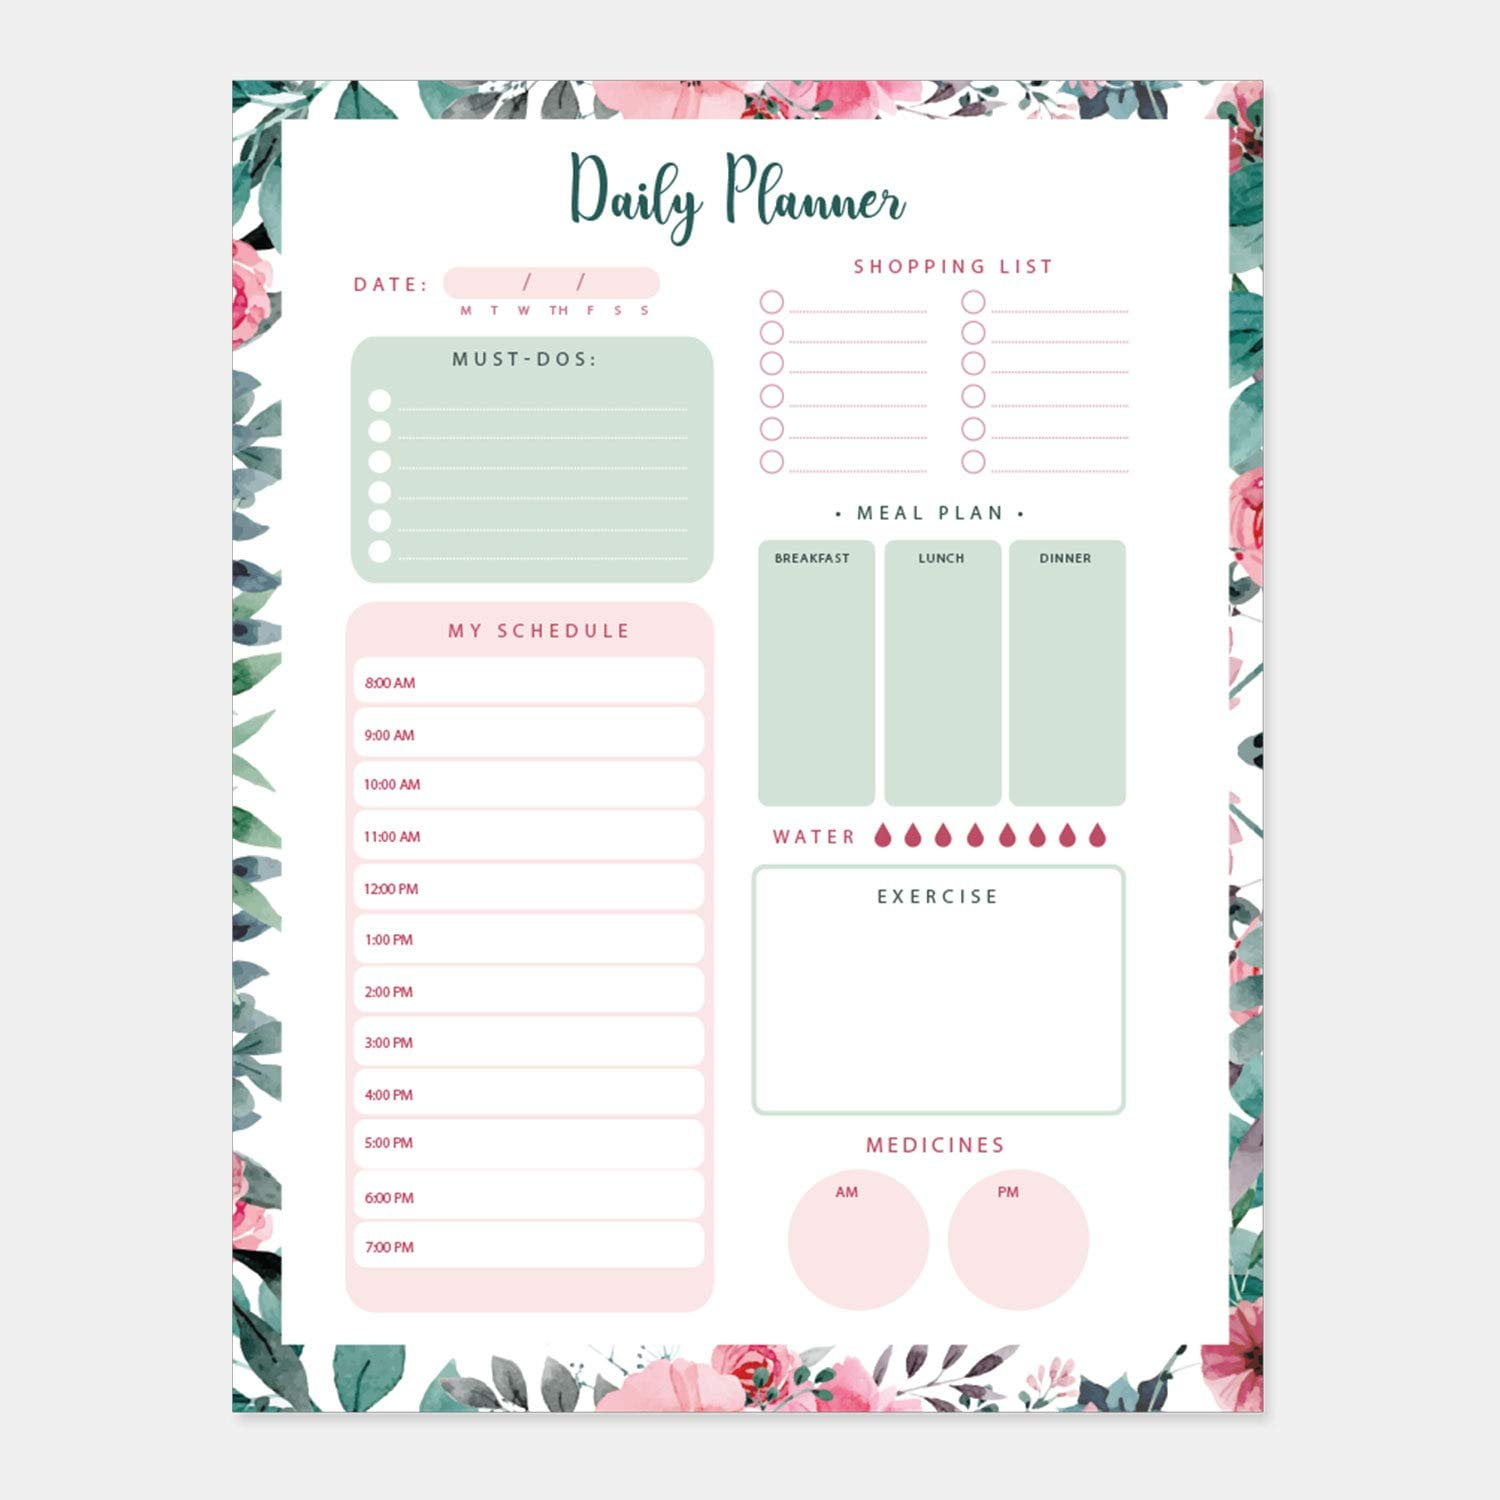 daily-planner-50-sheets-of-8-5-x-11-inches-undated-checklist-organizer